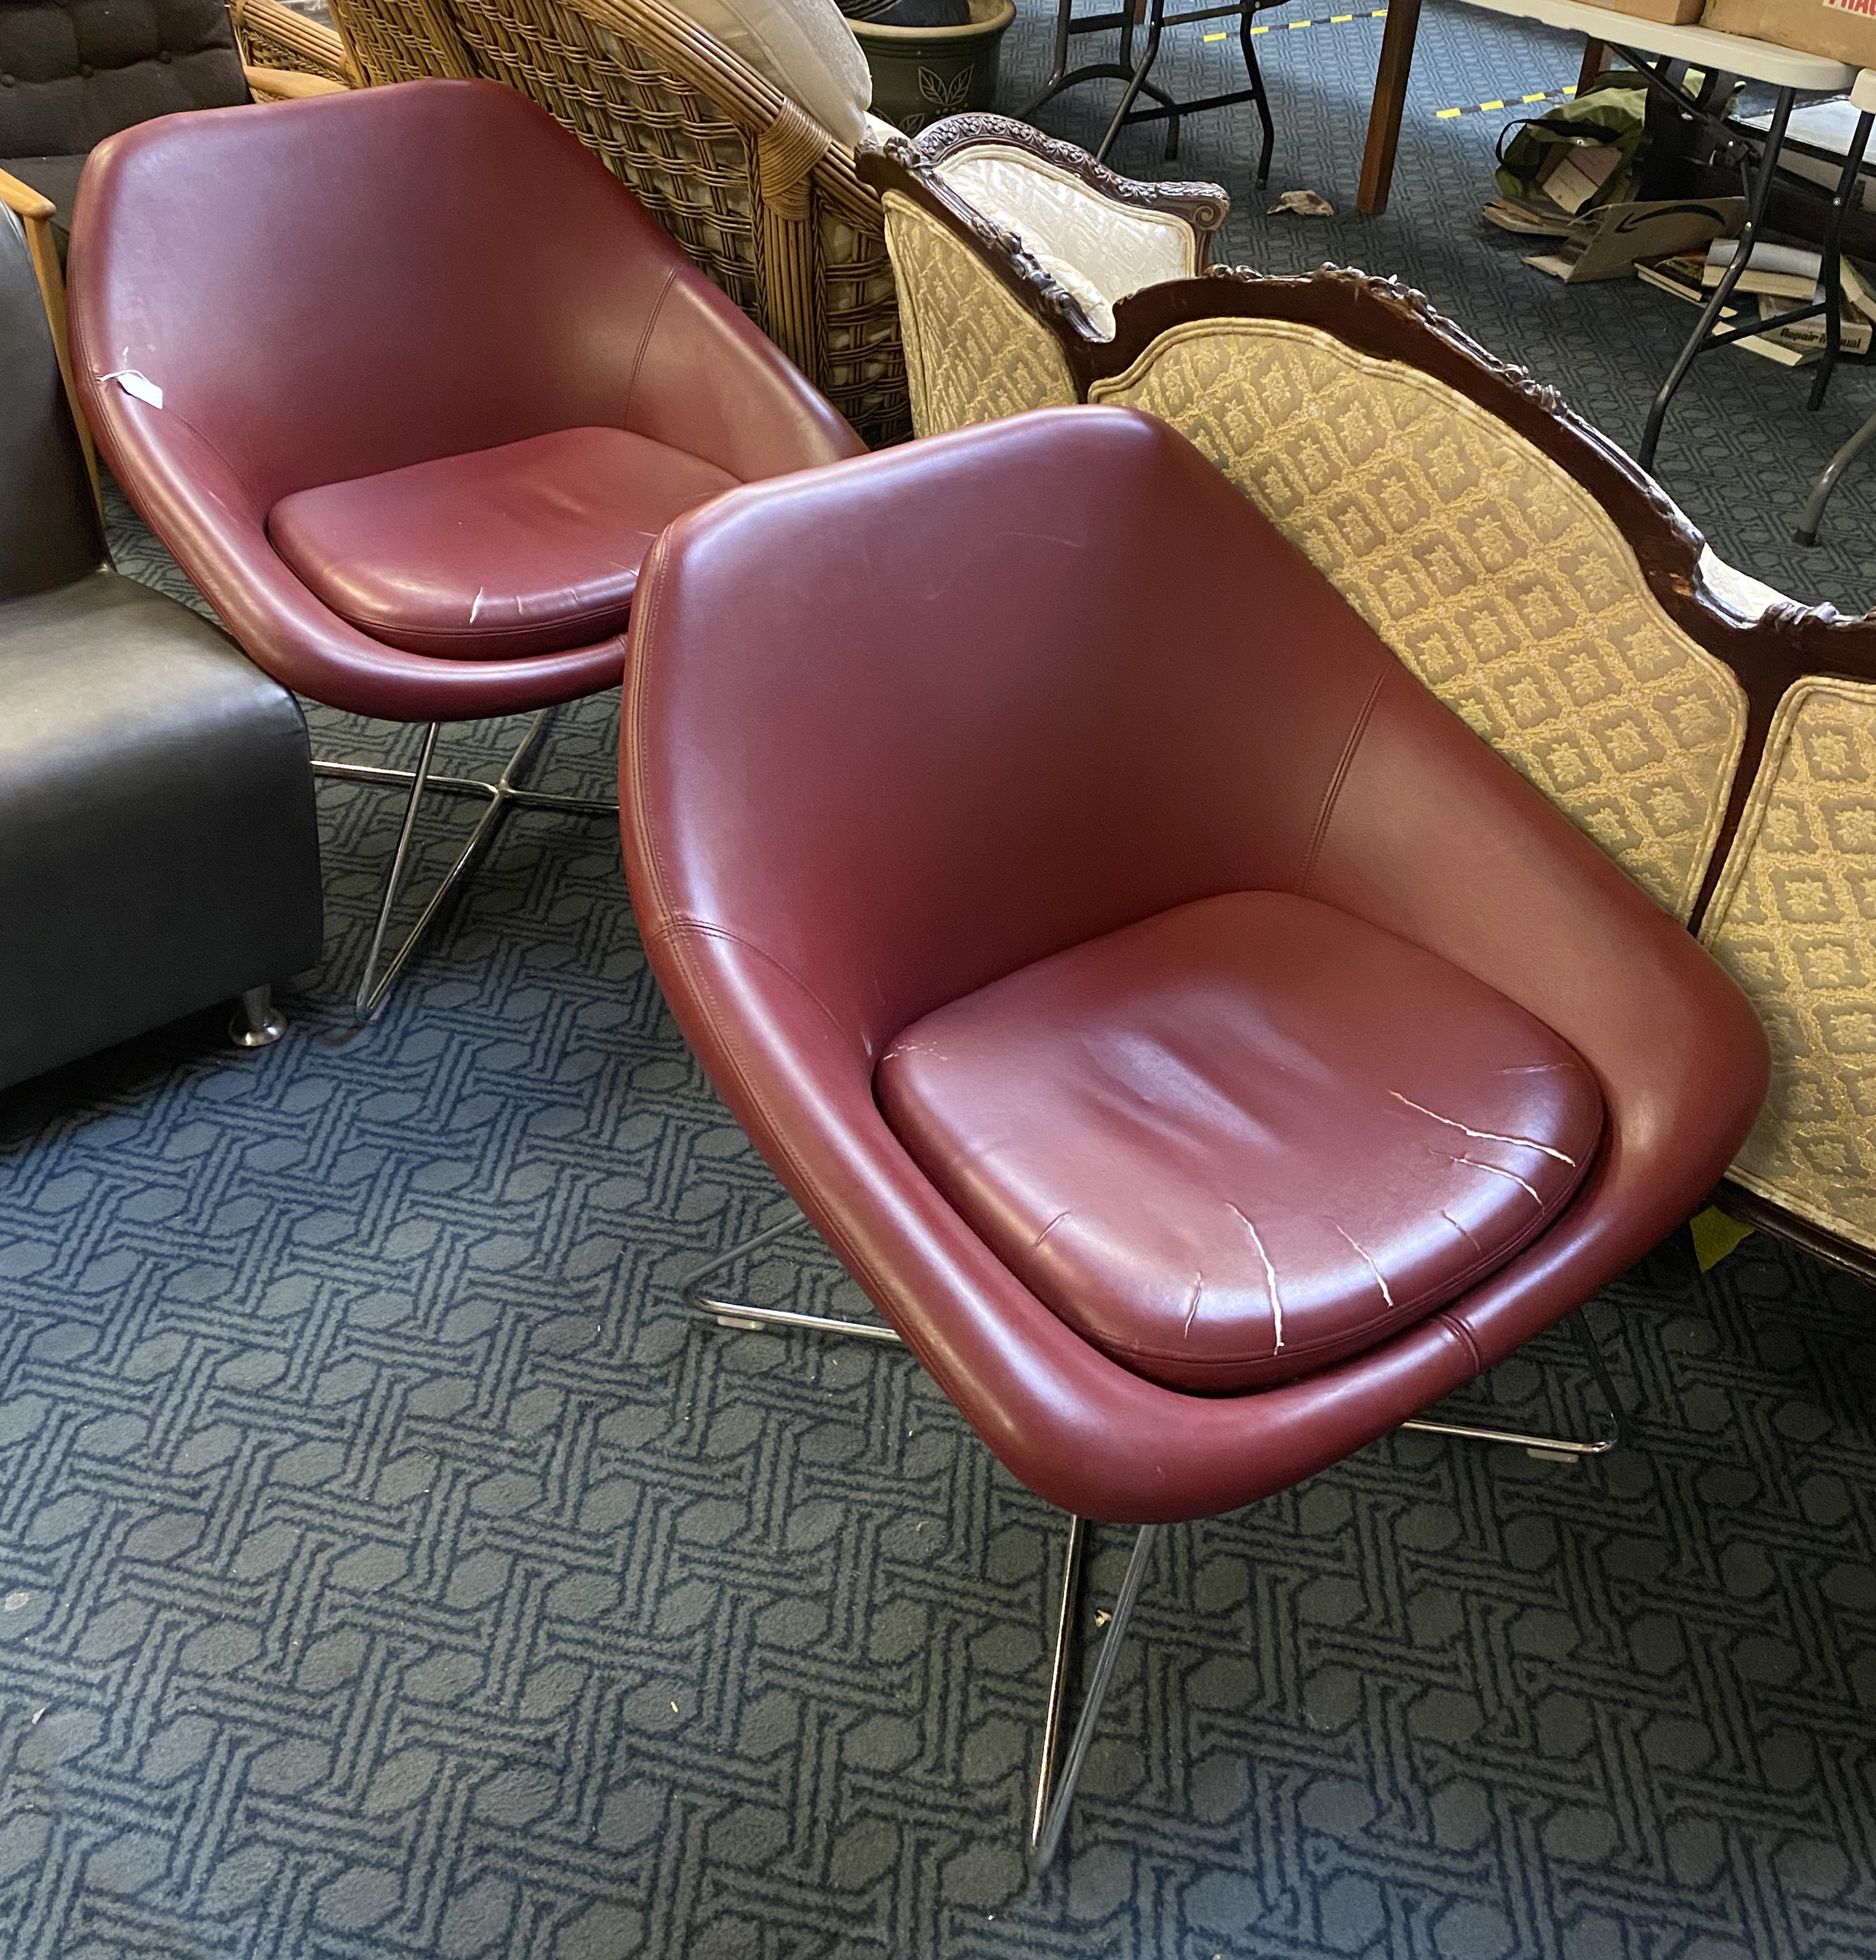 PAIR OF DESIGNER LEATHER & CHROME CHAIRS BY ALLERMUIR (SEATS NEED REPAIR)